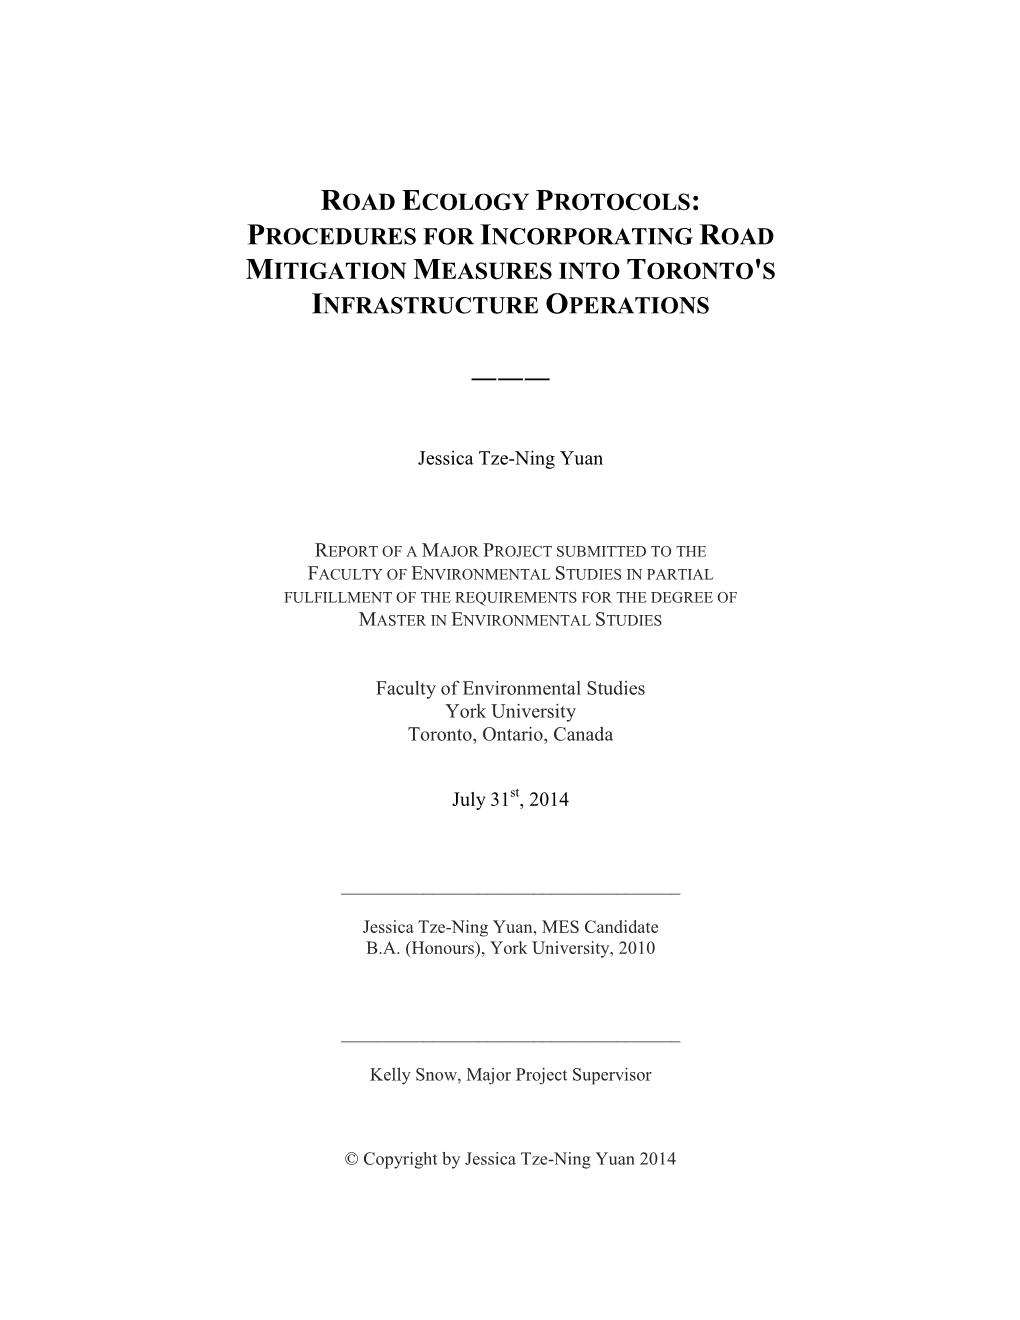 Road Ecology Protocols: Procedures for Incorporating Road Mitigation Measures Into Toronto's Infrastructure Operations